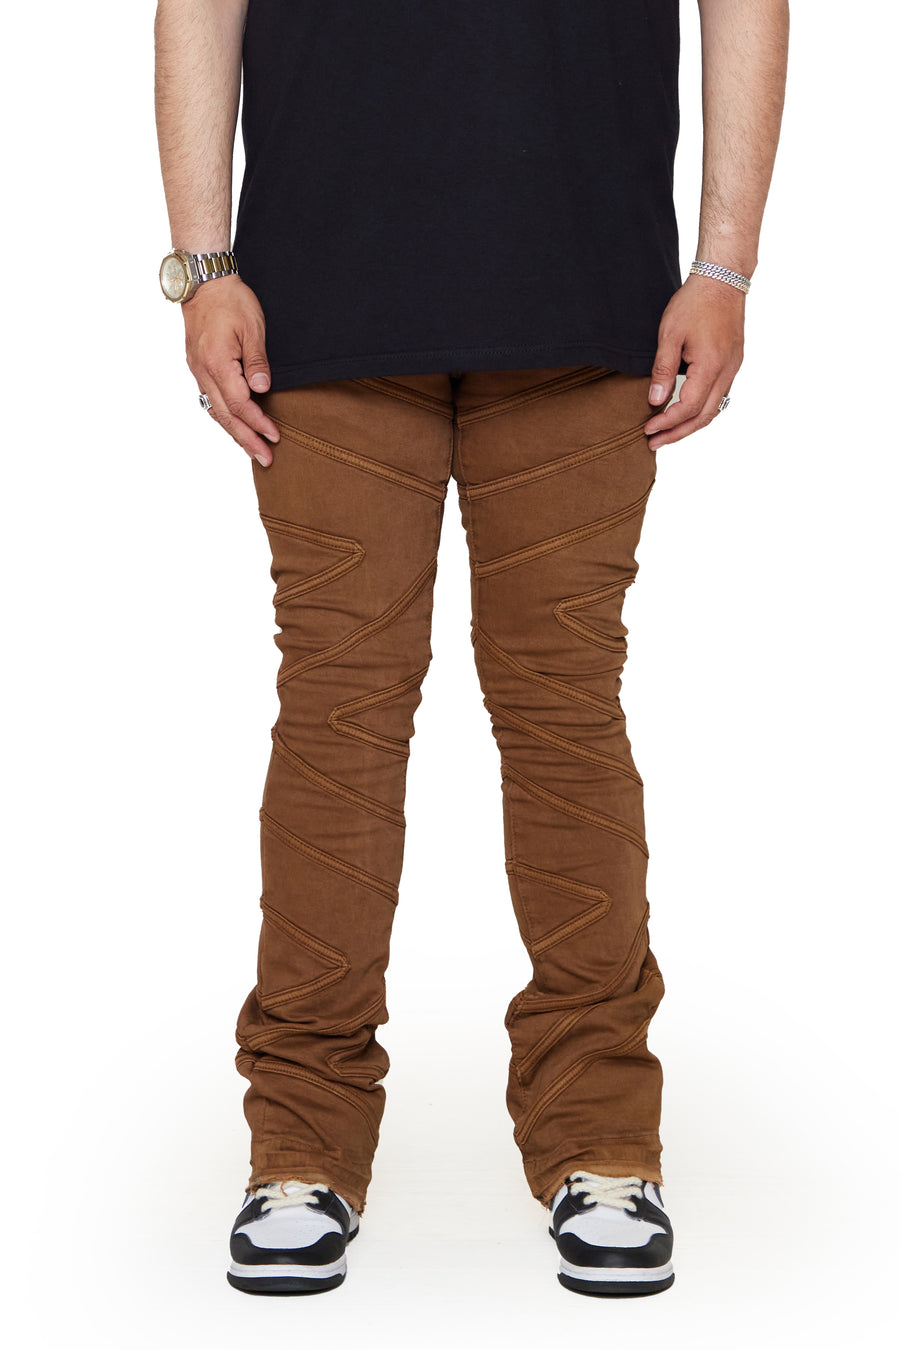 “CASSIUS” LT. BROWN STACKED FLARE JEAN